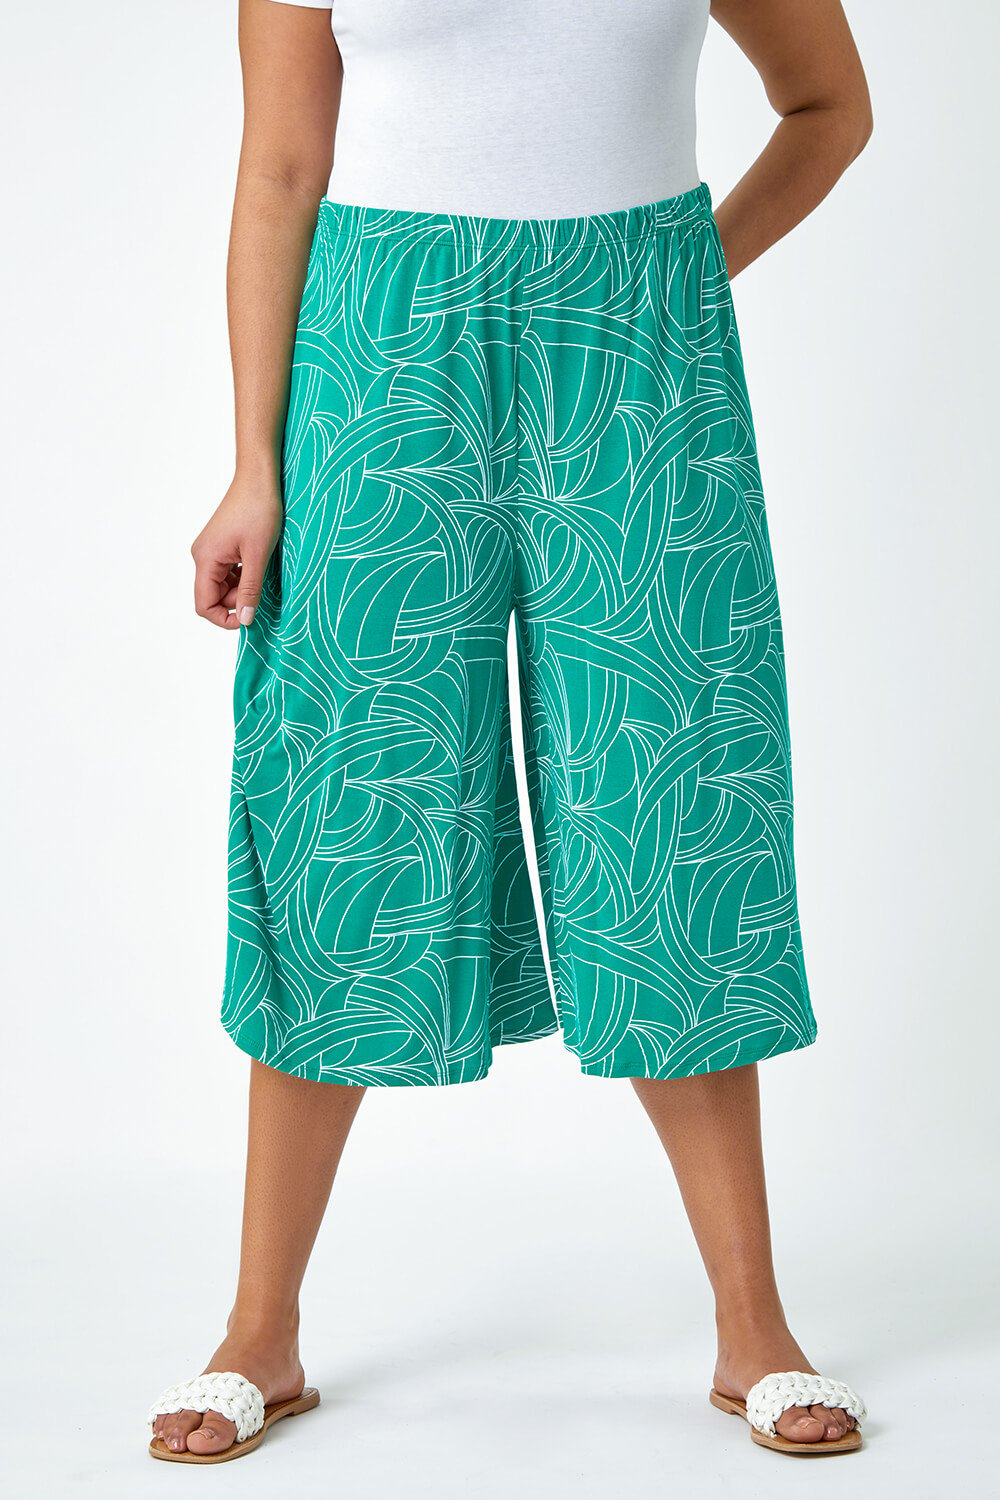 Green Curve Abstract Swirl Stretch Culottes | Roman UK